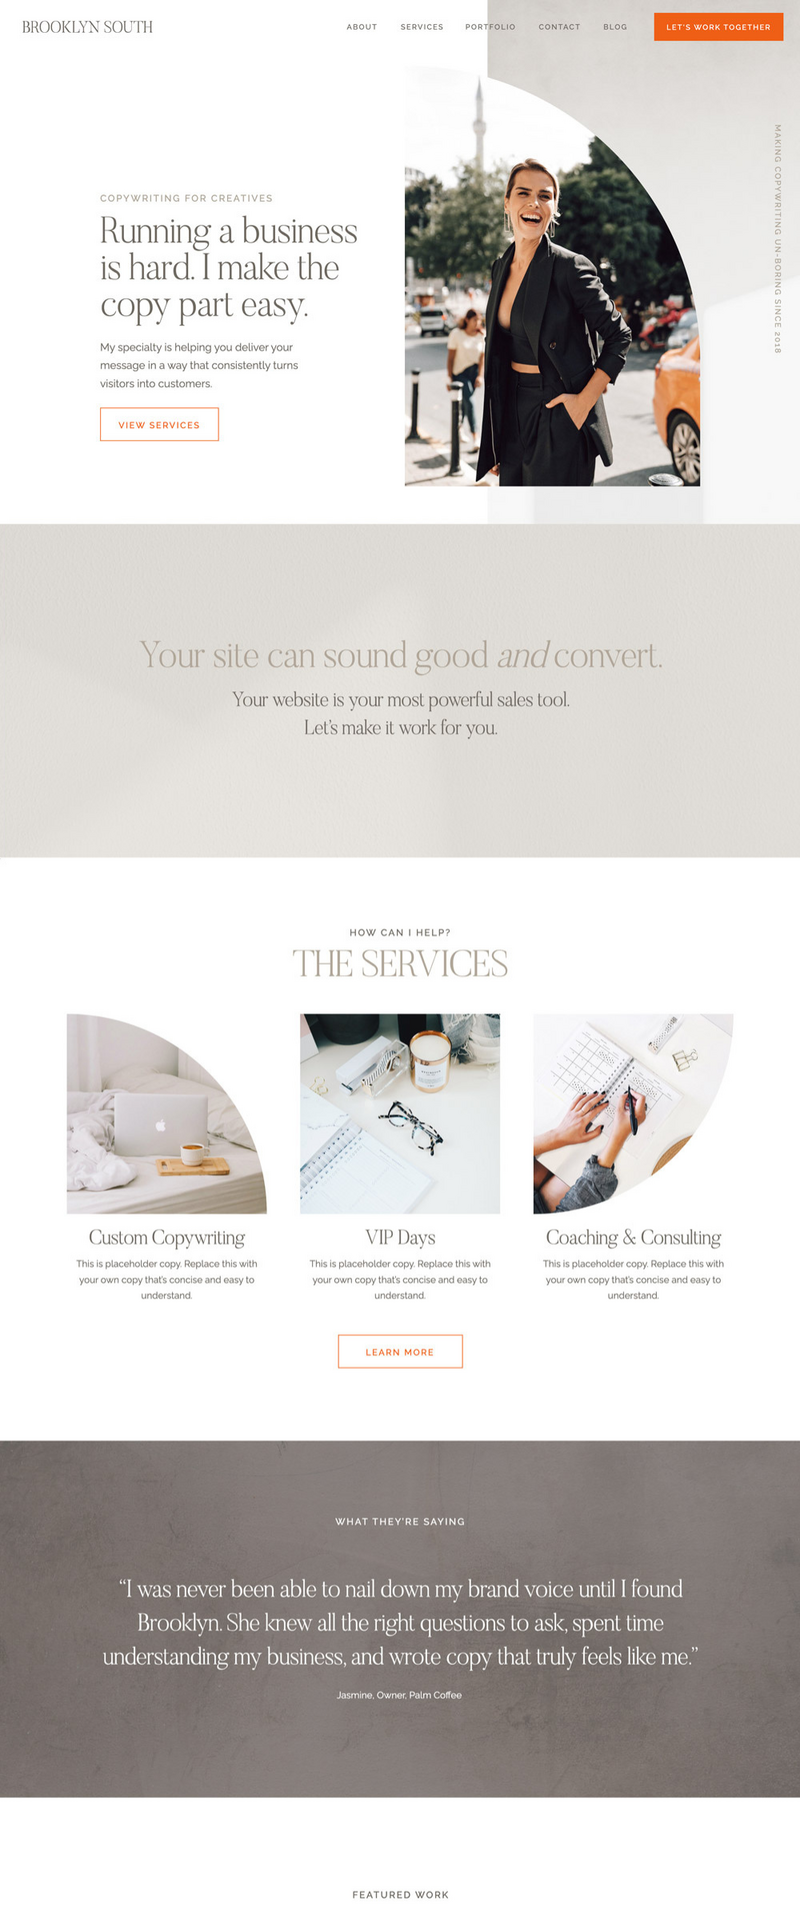 showit_template_for_creative_service_providers_-_brooklyn_south_1